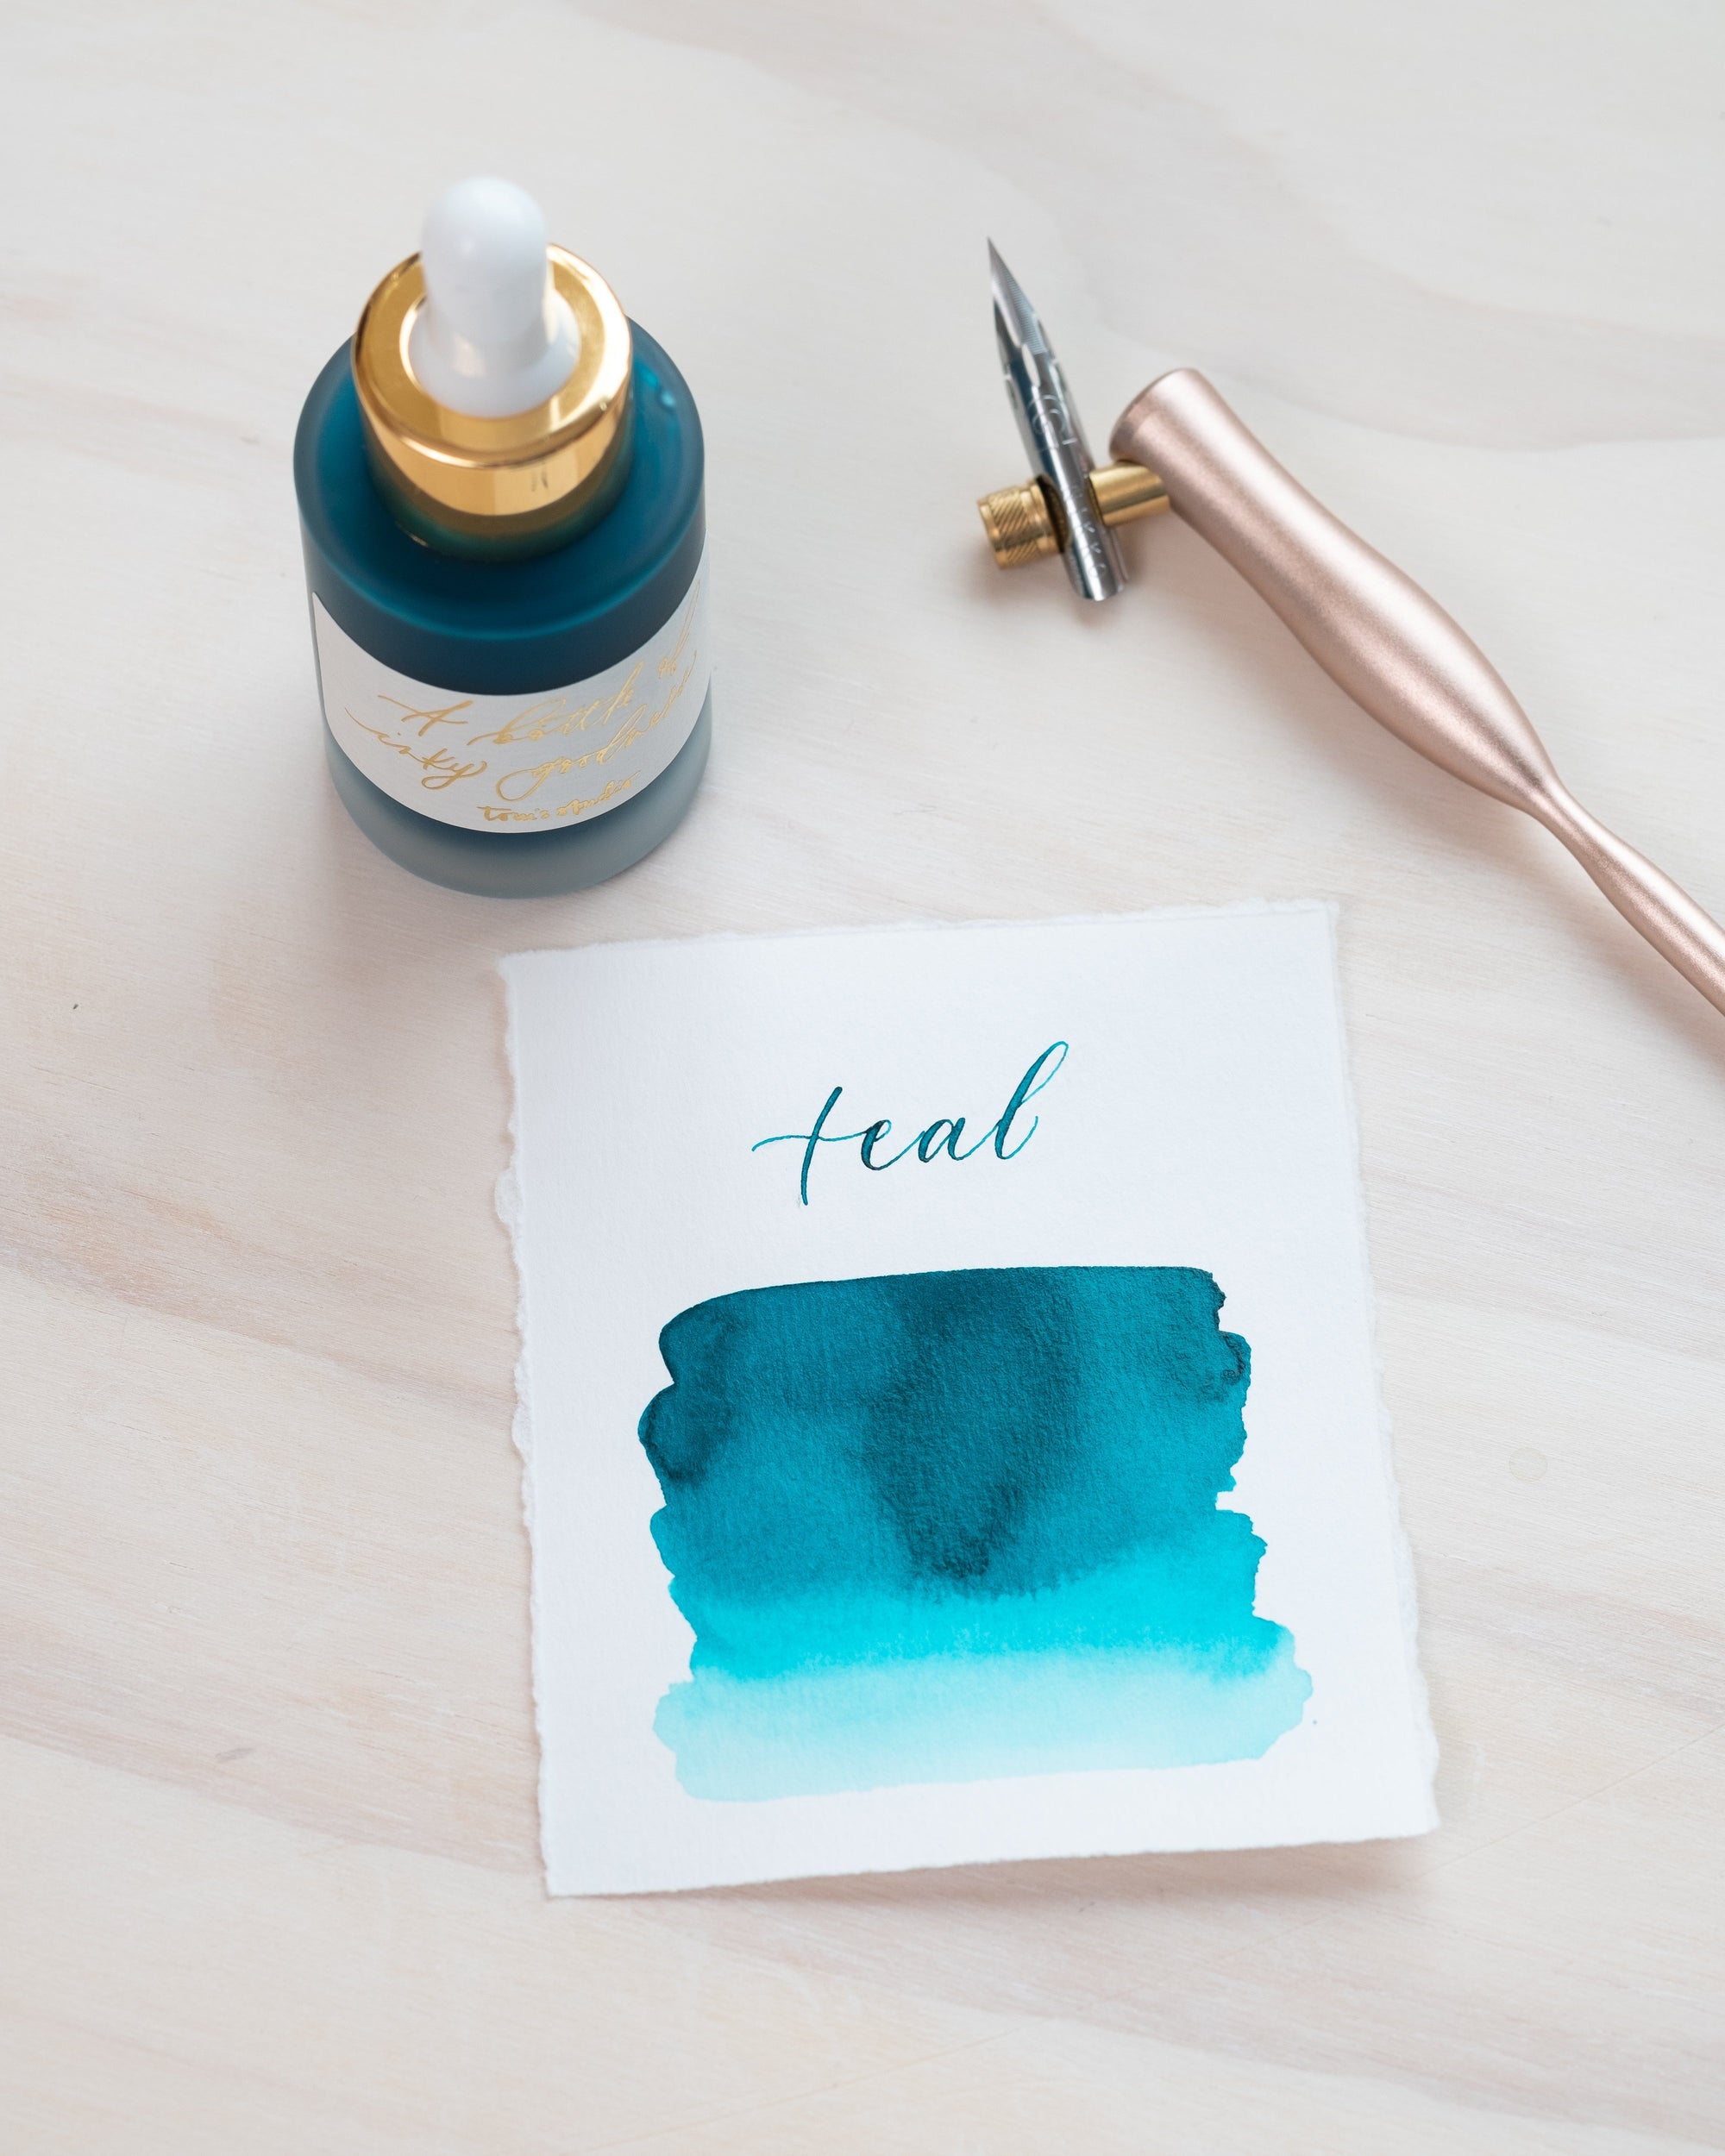 Teal - Calligraphy Ink in bottle with swatch showing the ink colour